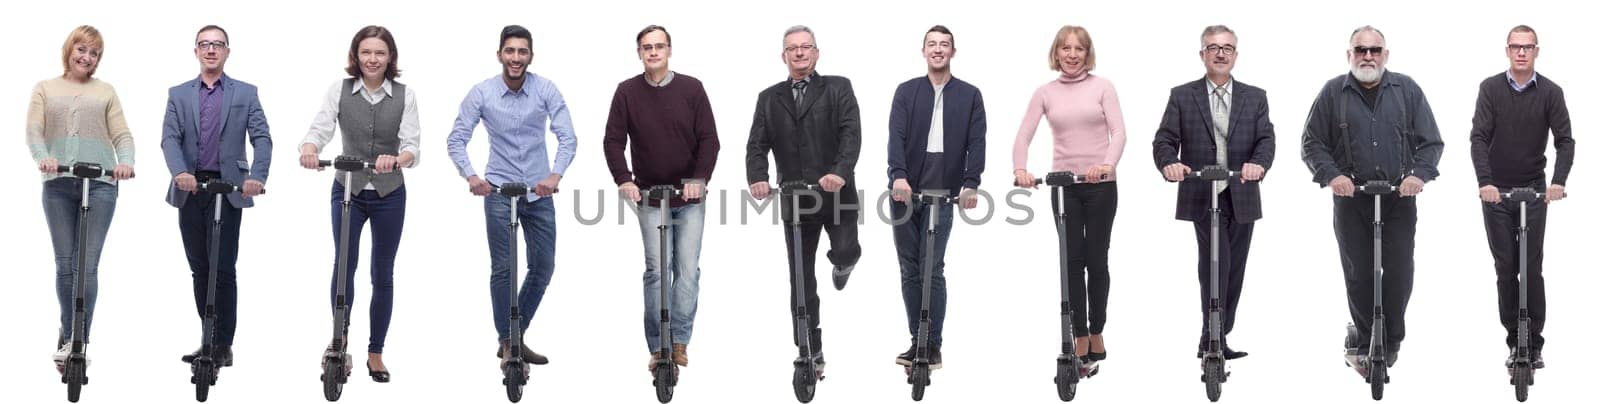 group of successful people on scooter isolated by asdf